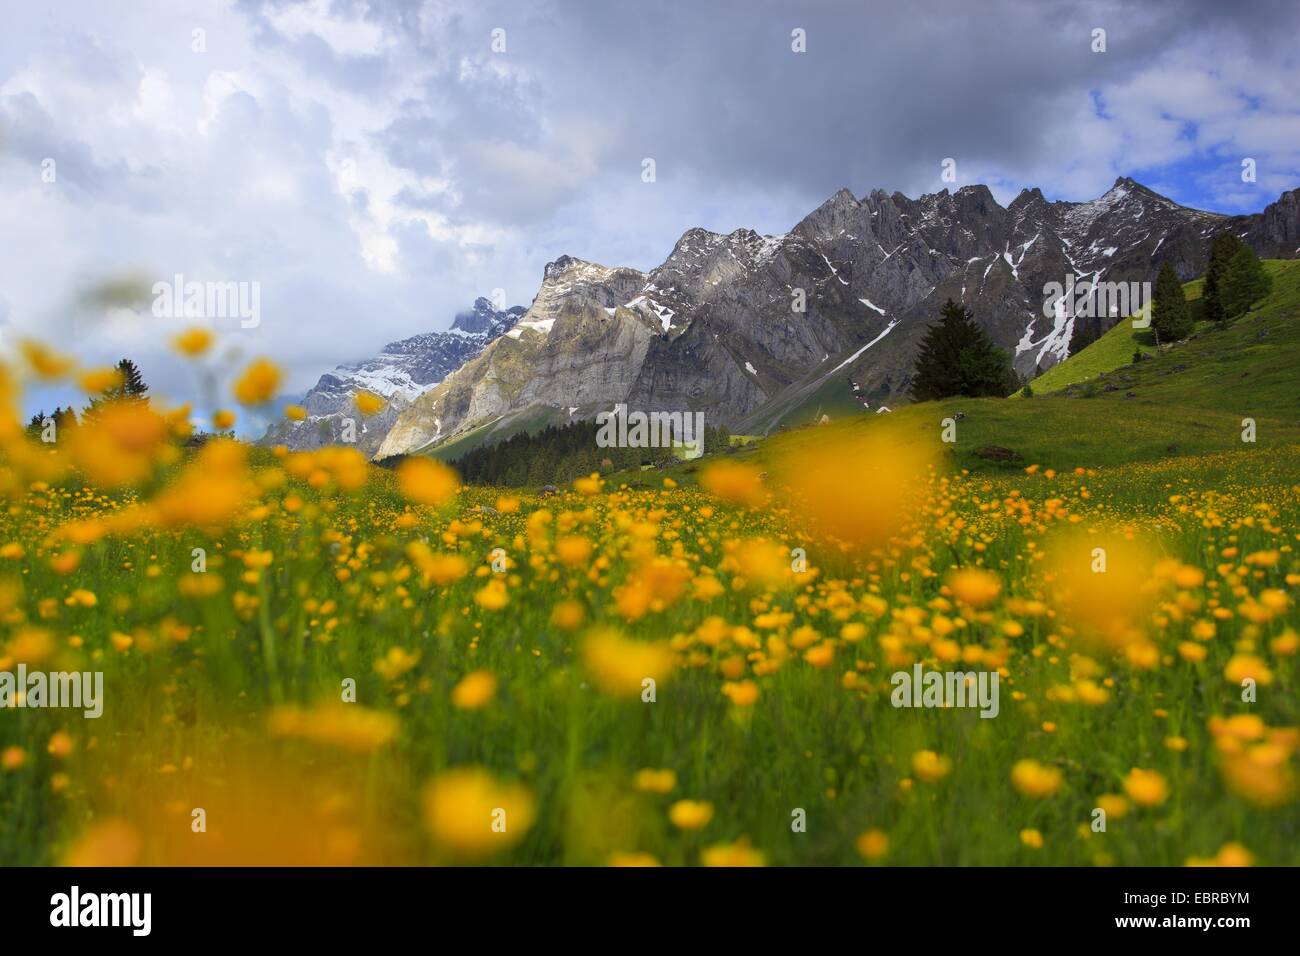 aconite-leaf buttercup (Ranunculus aconitifolius), view from a mountain meadow covered with buttercups at the Alpstein massif with the highest mountain Saentis (2502 m), Switzerland Stock Photo